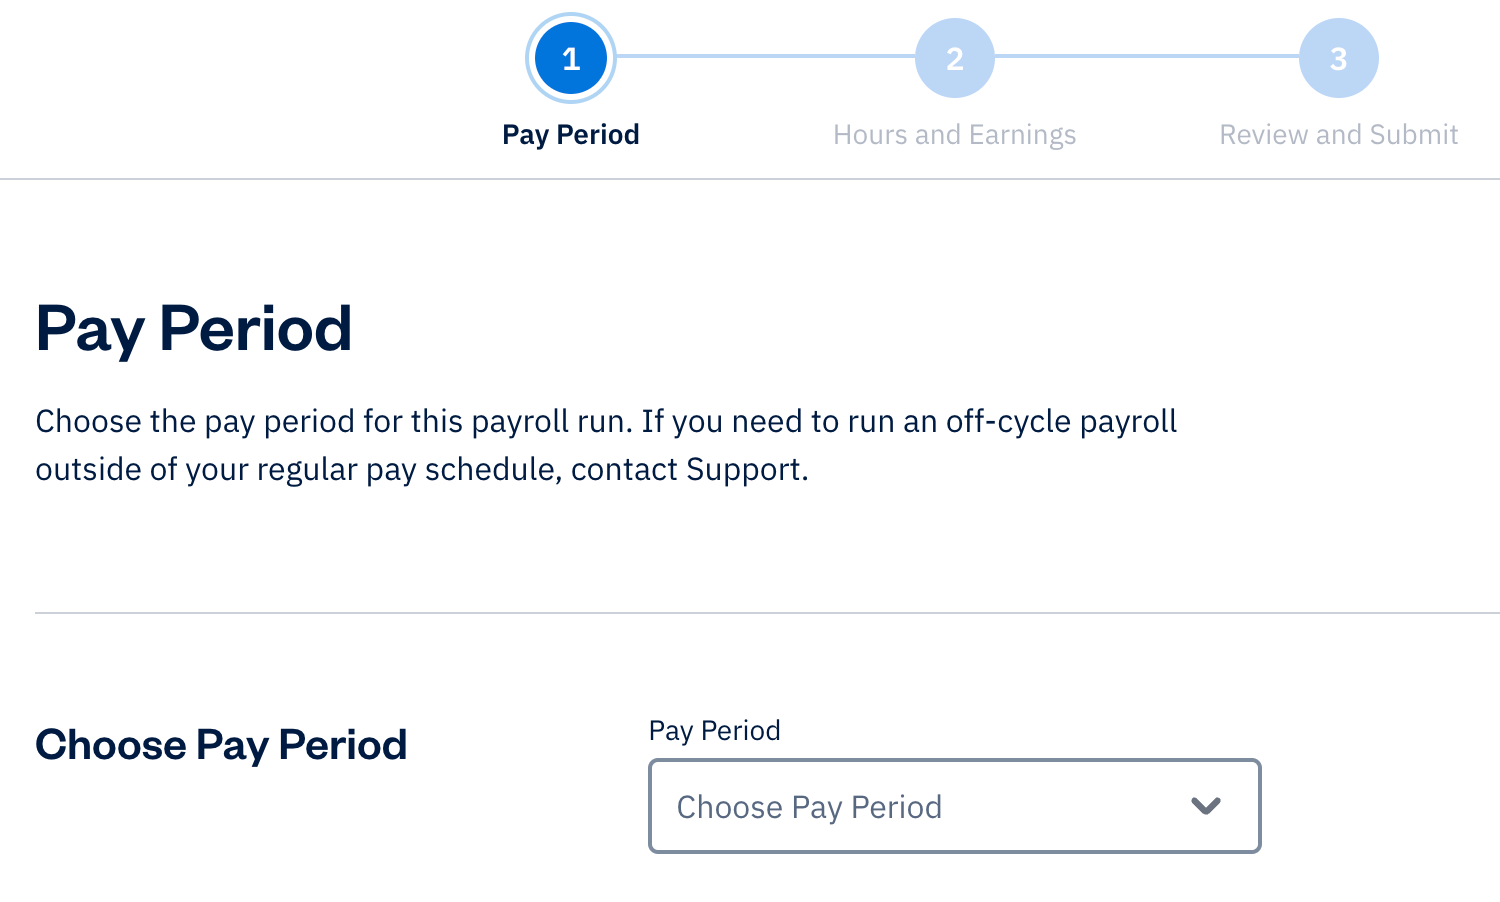 Pay period section with dropdown to choose a pay period.